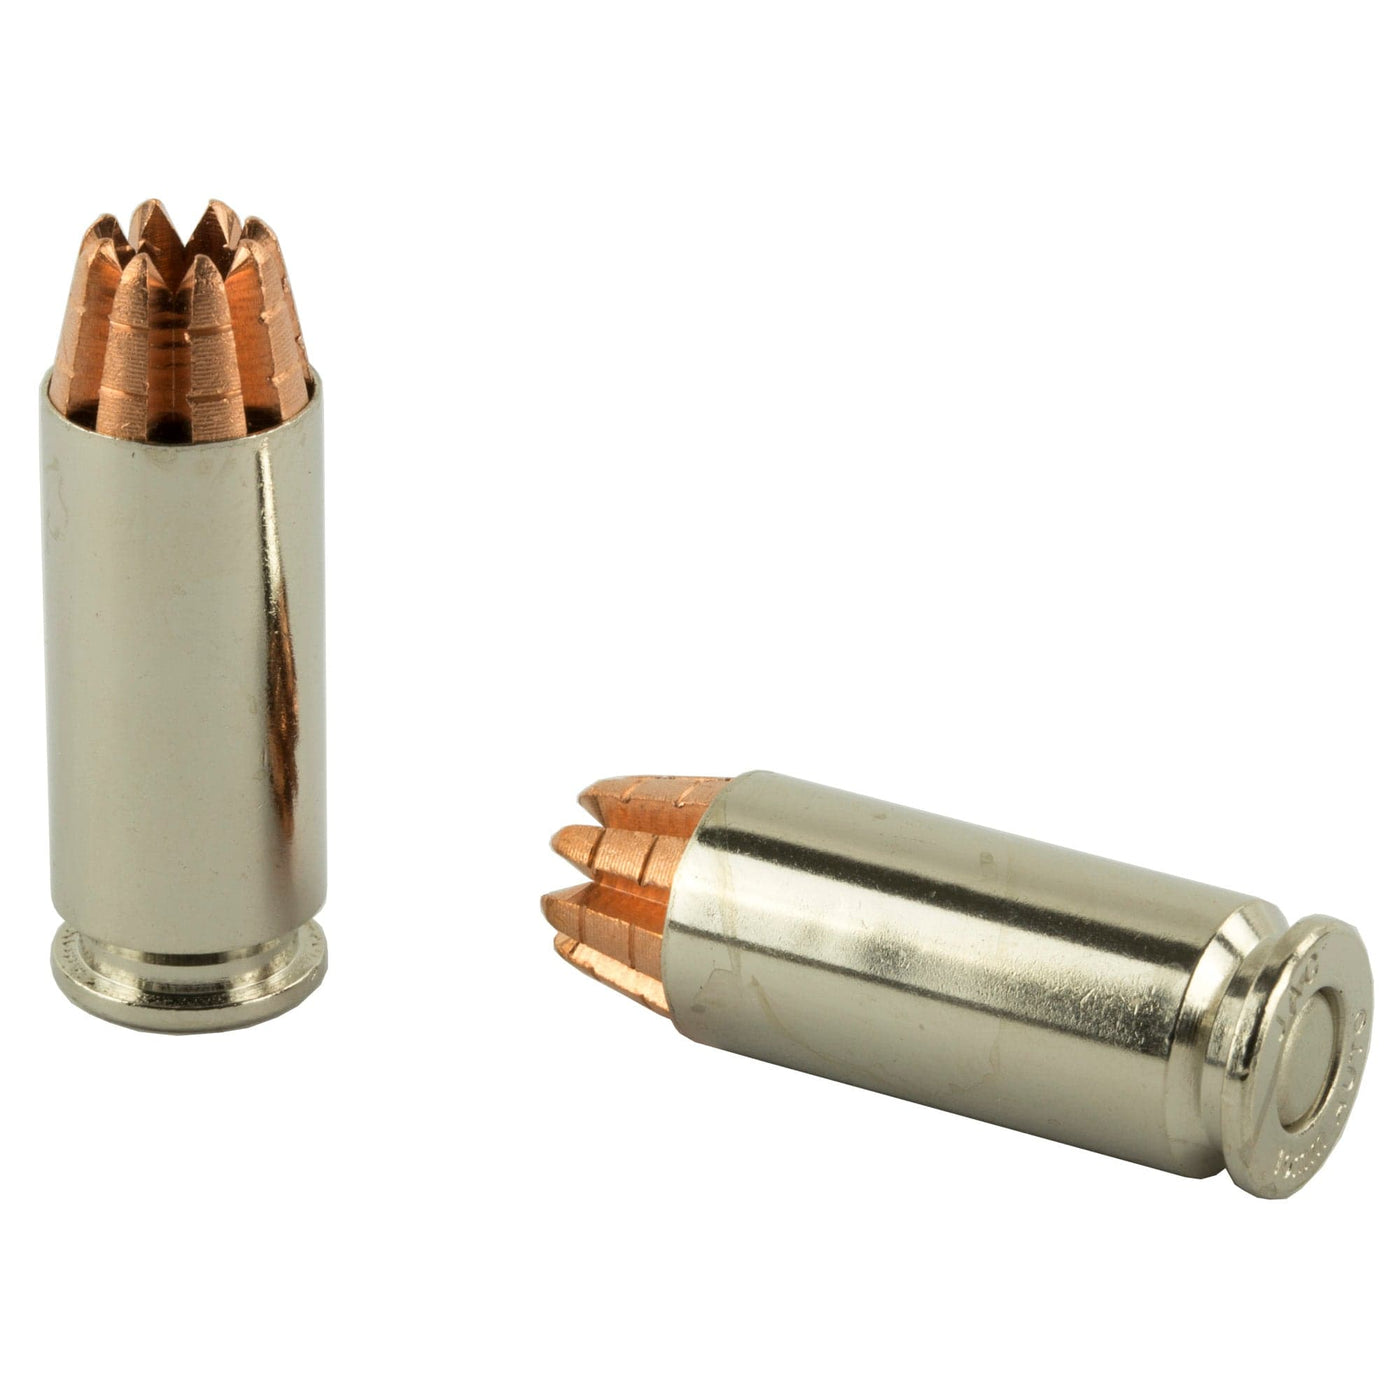 G2 Research G2r Rip 10mm 115gr 20/500 Ammo